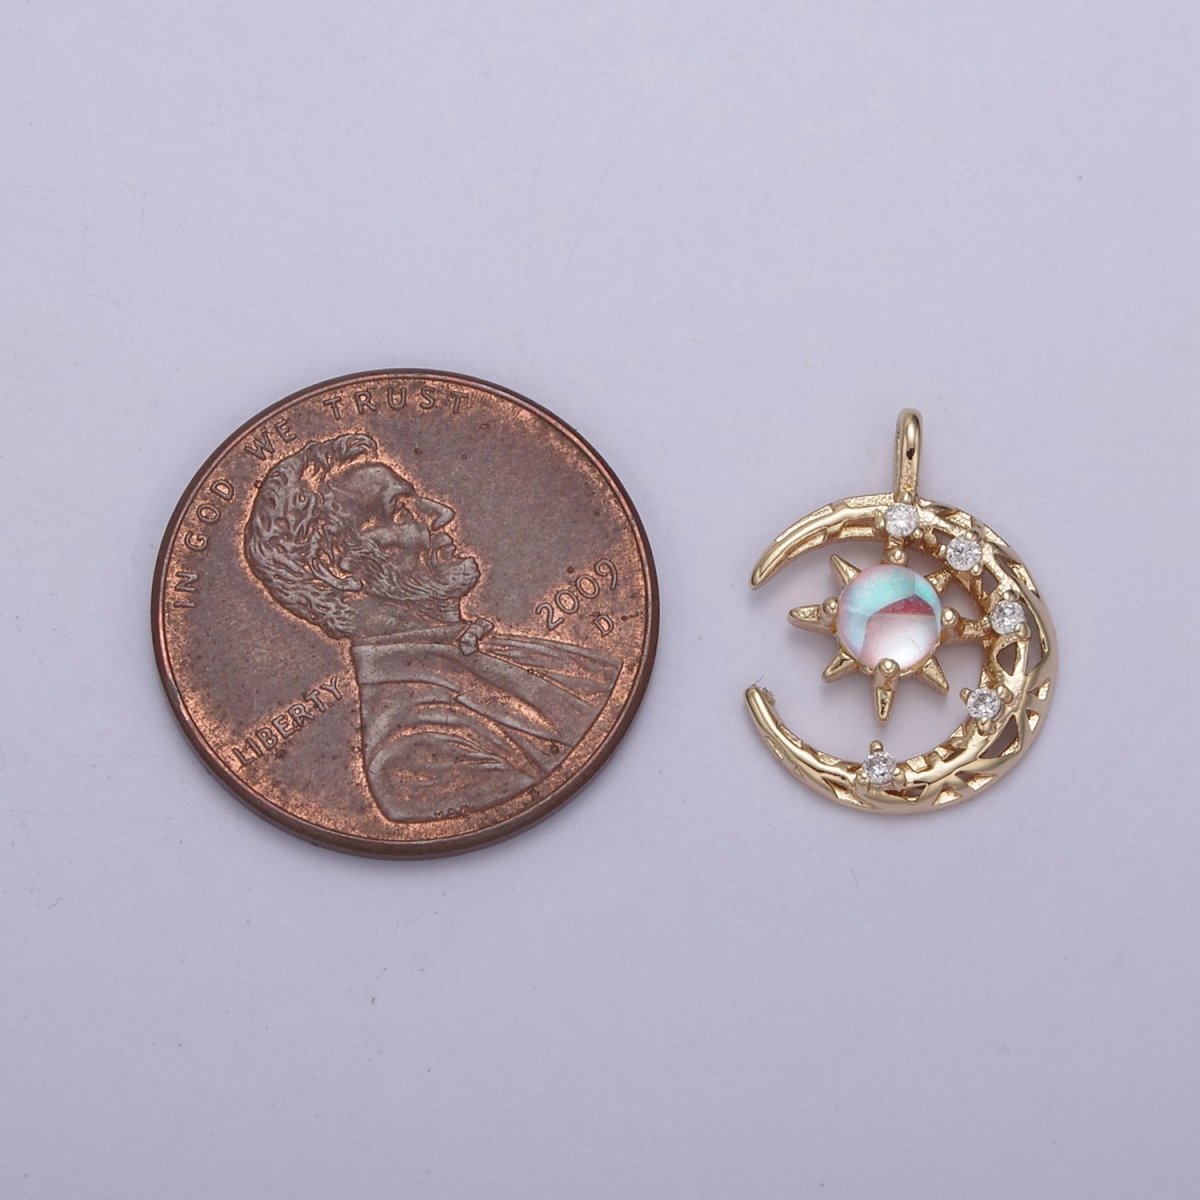 Mini Micro Pave Rainbow Moonstone Crescent Moon Pendant in 14k Gold Filled Celestial Jewelry June Birthstone N-704 - DLUXCA